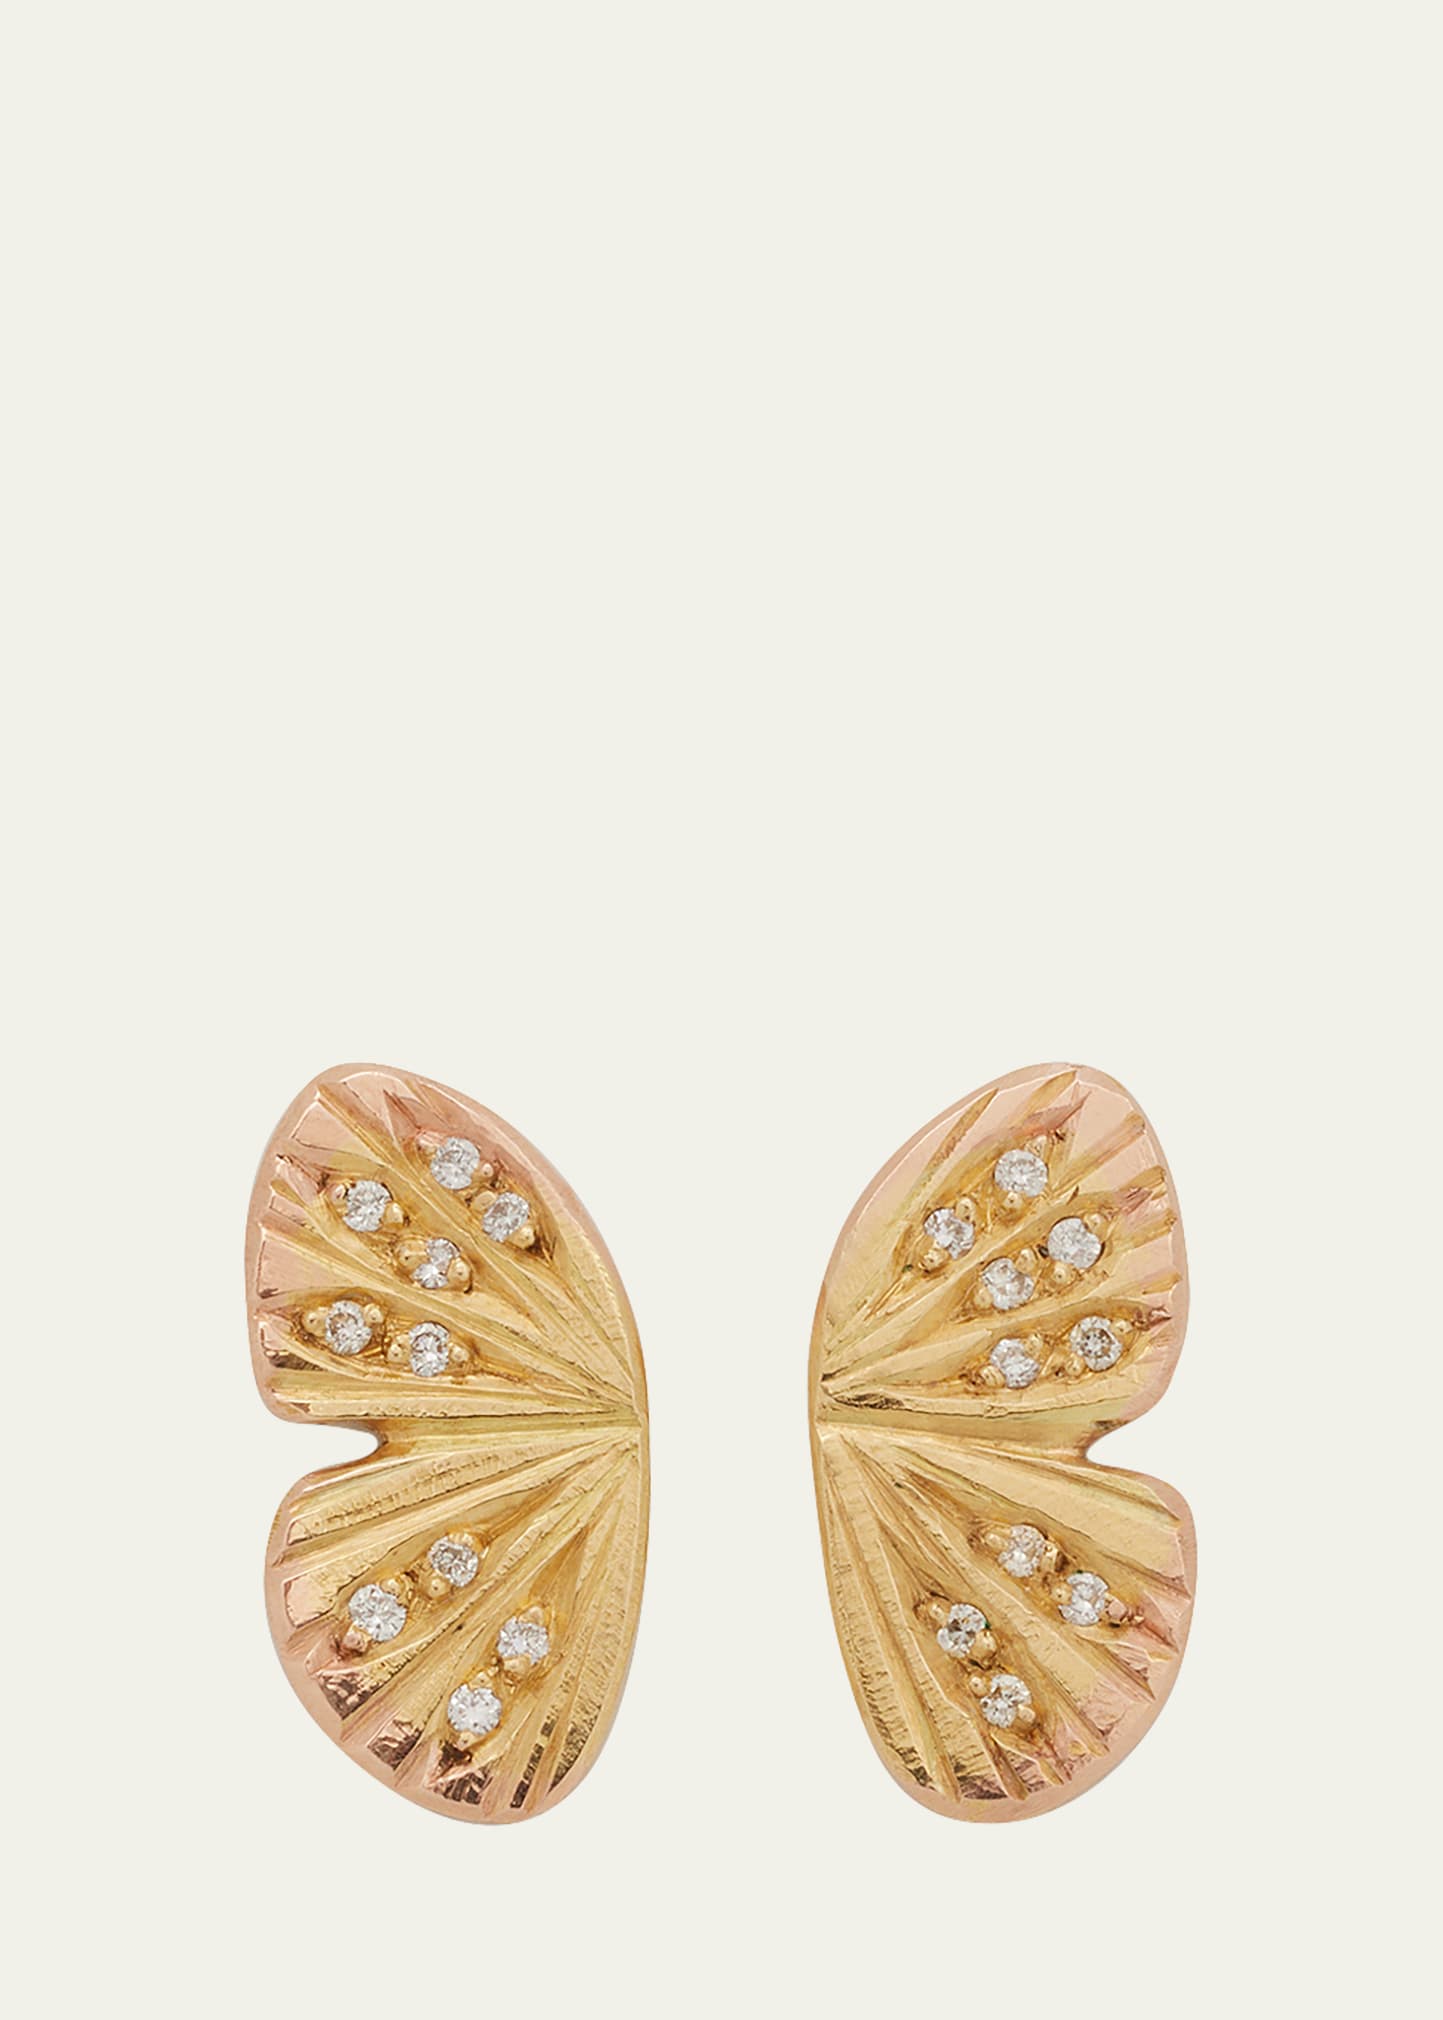 James Banks Baby Asterope Pave Stud Earrings With 18k Gold, 14k Gold And White Diamonds In Yg